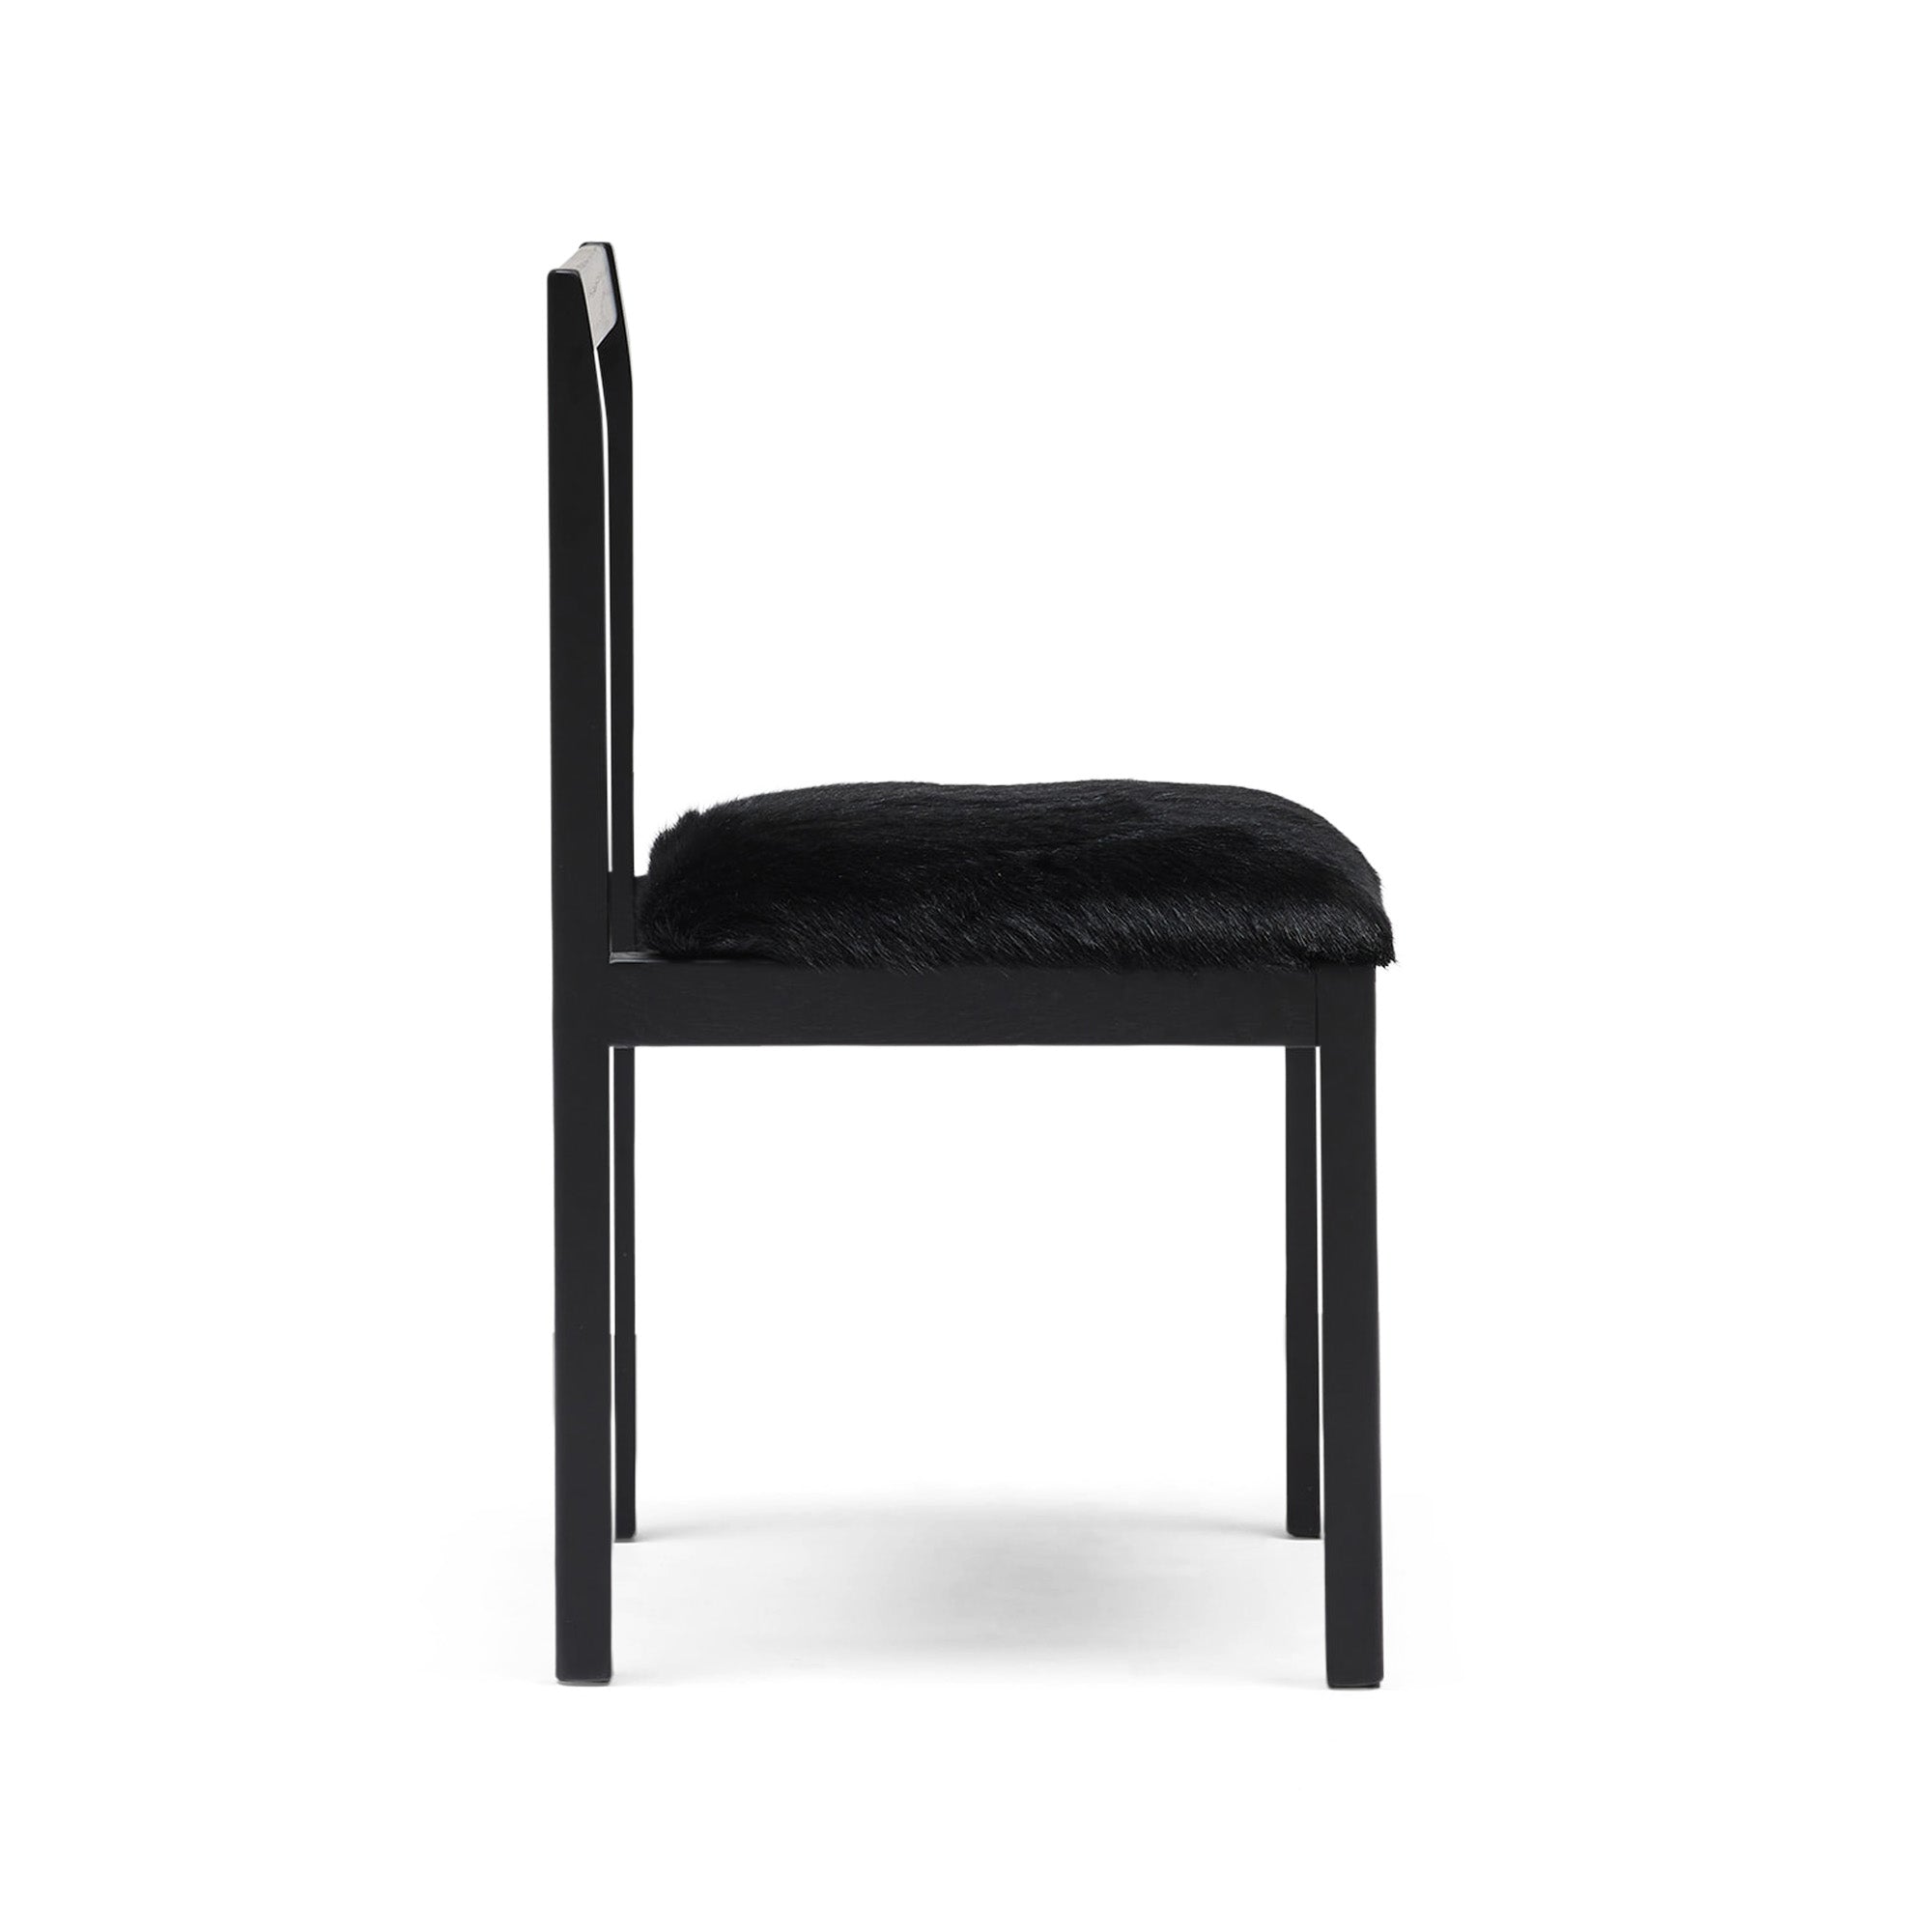 Subo Dining Chair Black Goat Skin